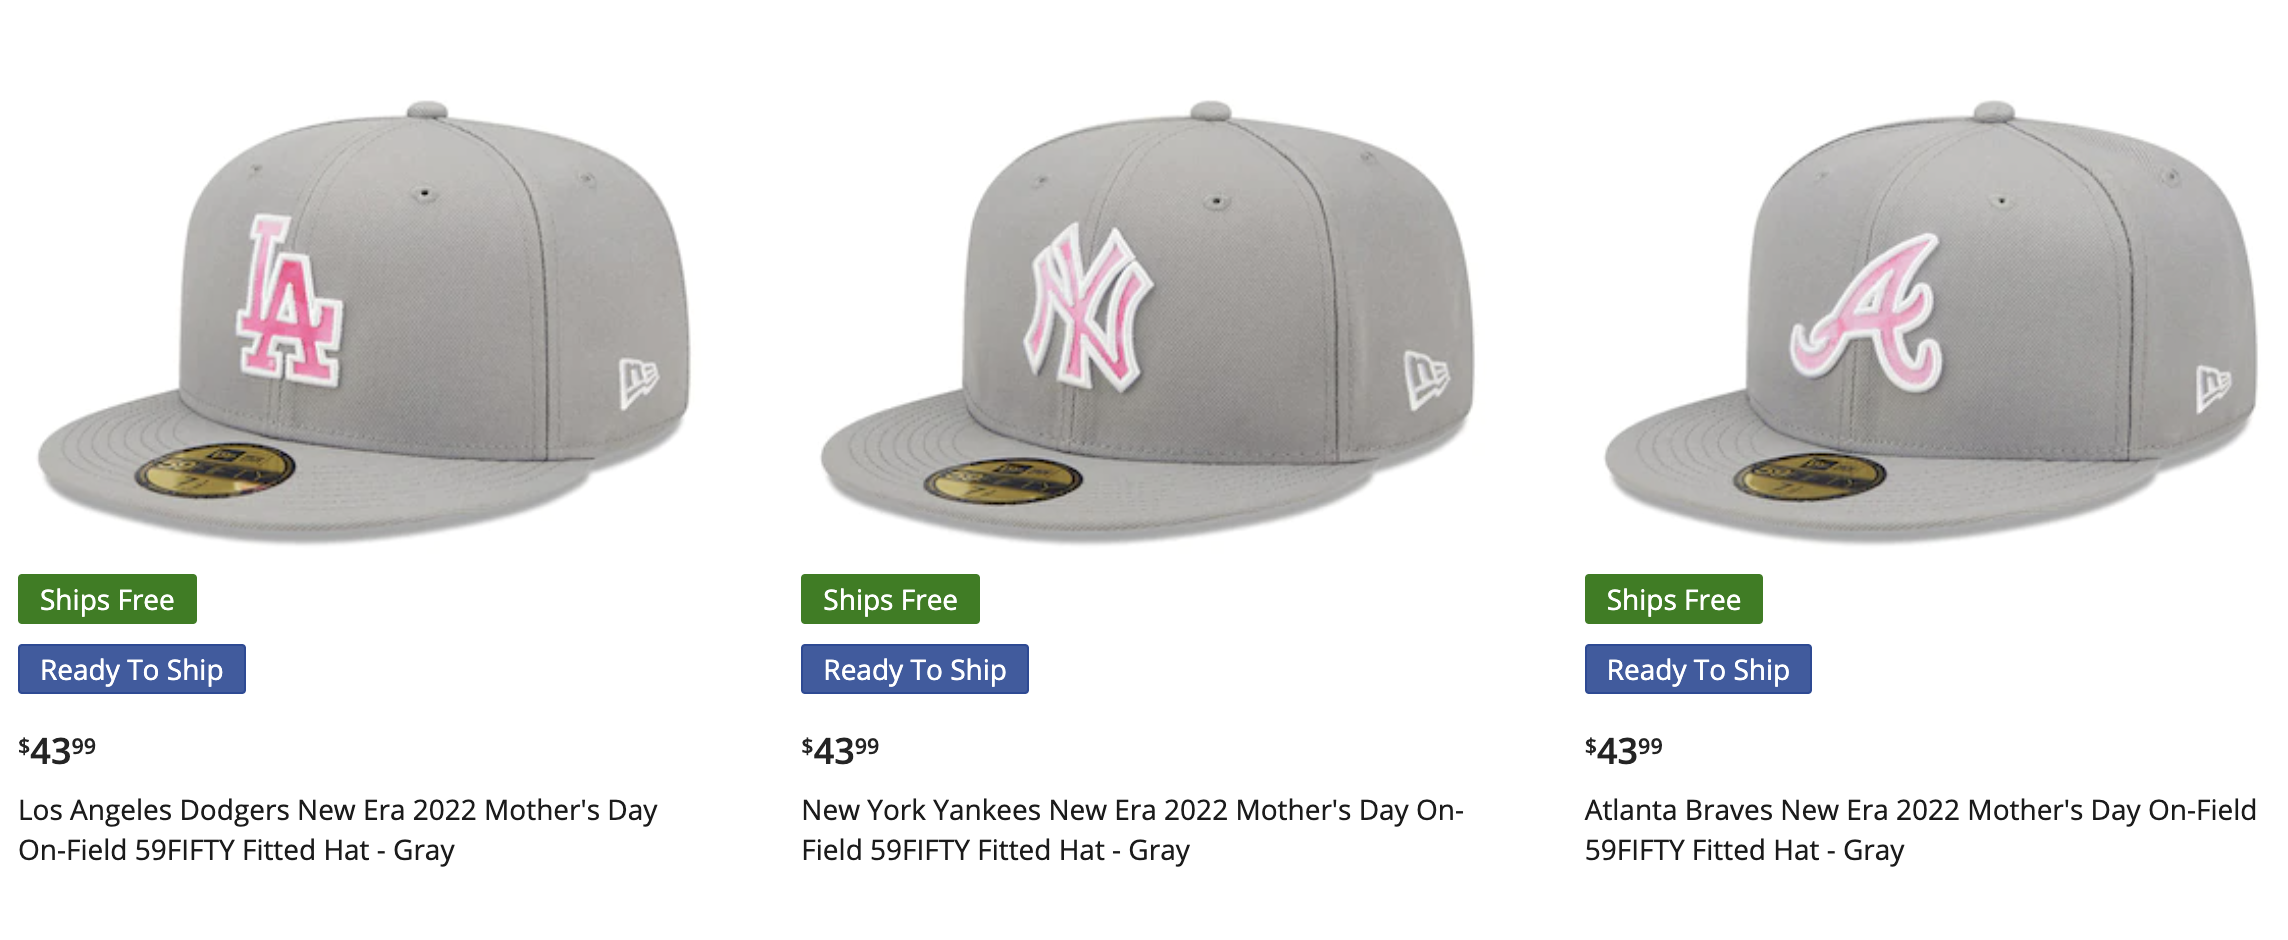 MLB Releases 2022 Mother's Day Caps for all 30 Teams – SportsLogos.Net News